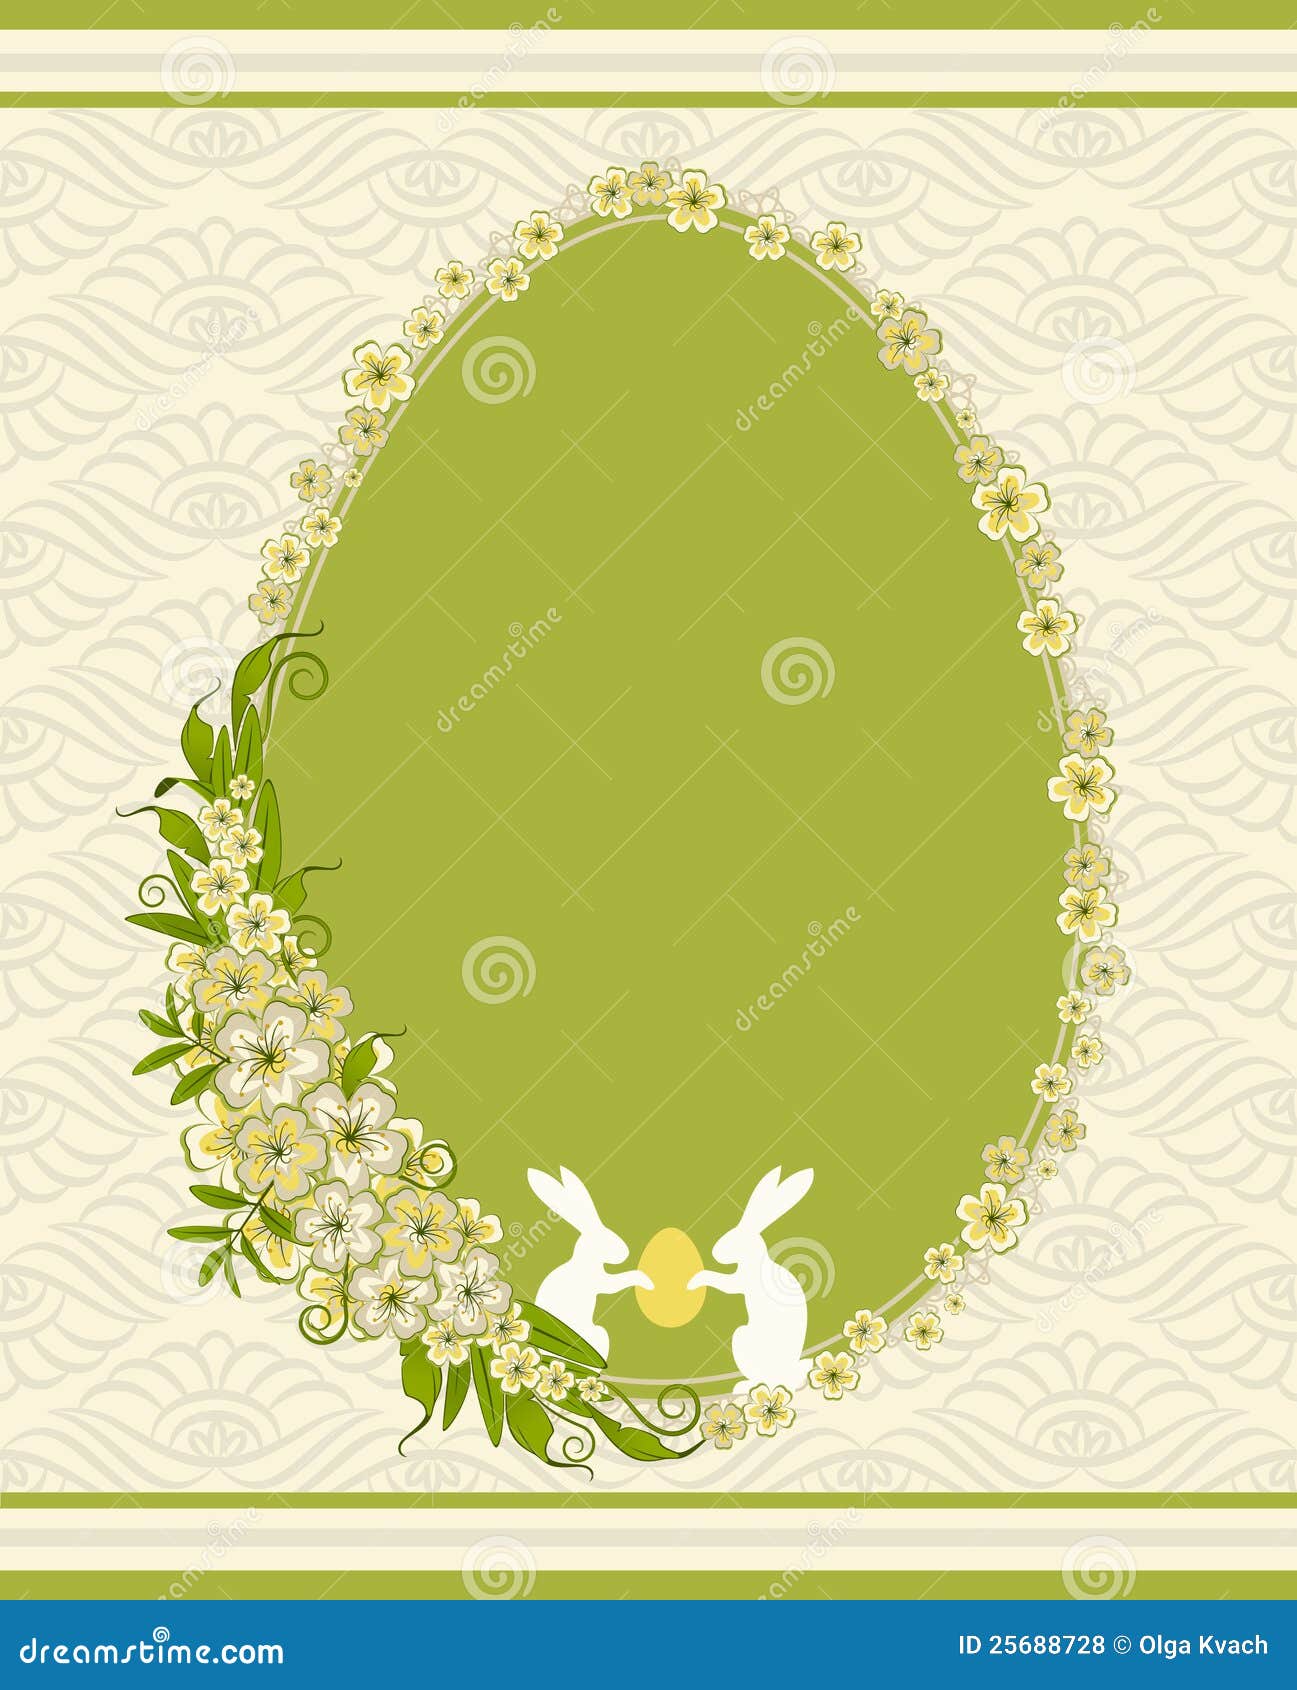 Bunny and flowers stock vector. Illustration of design - 25688728